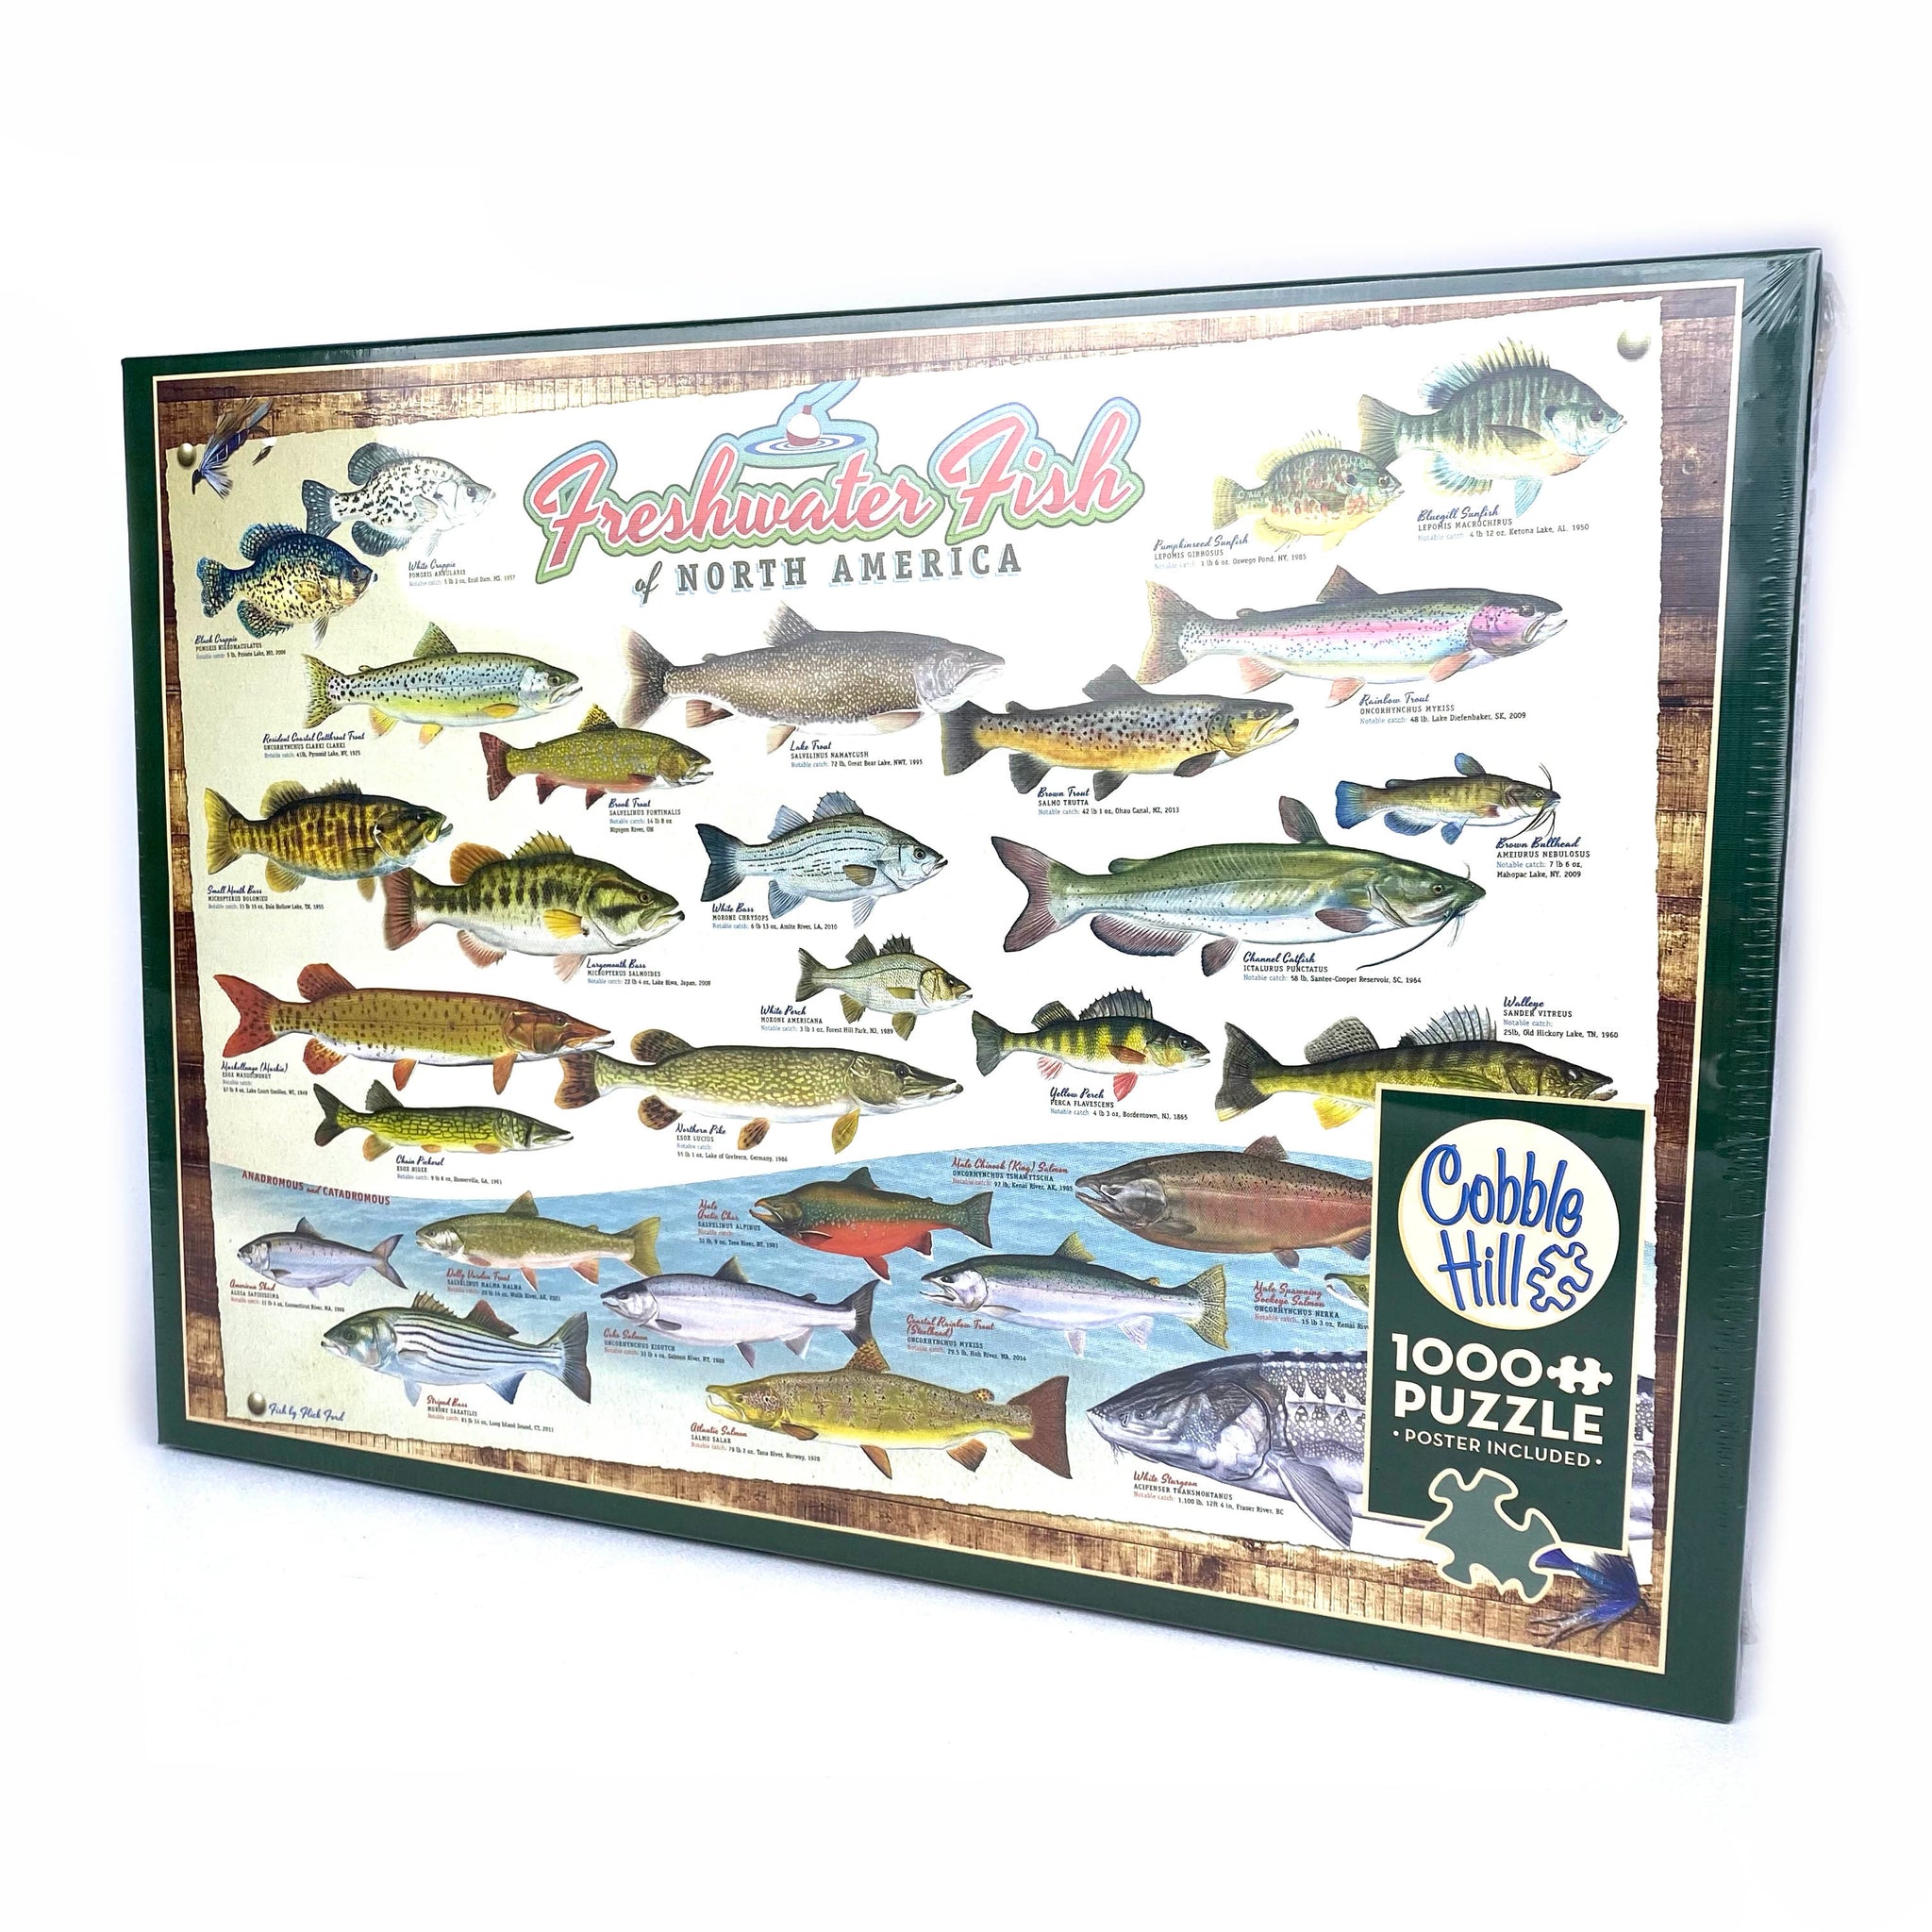 Freshwater Fish of North America Puzzle – The Canadian Canoe Museum's Store